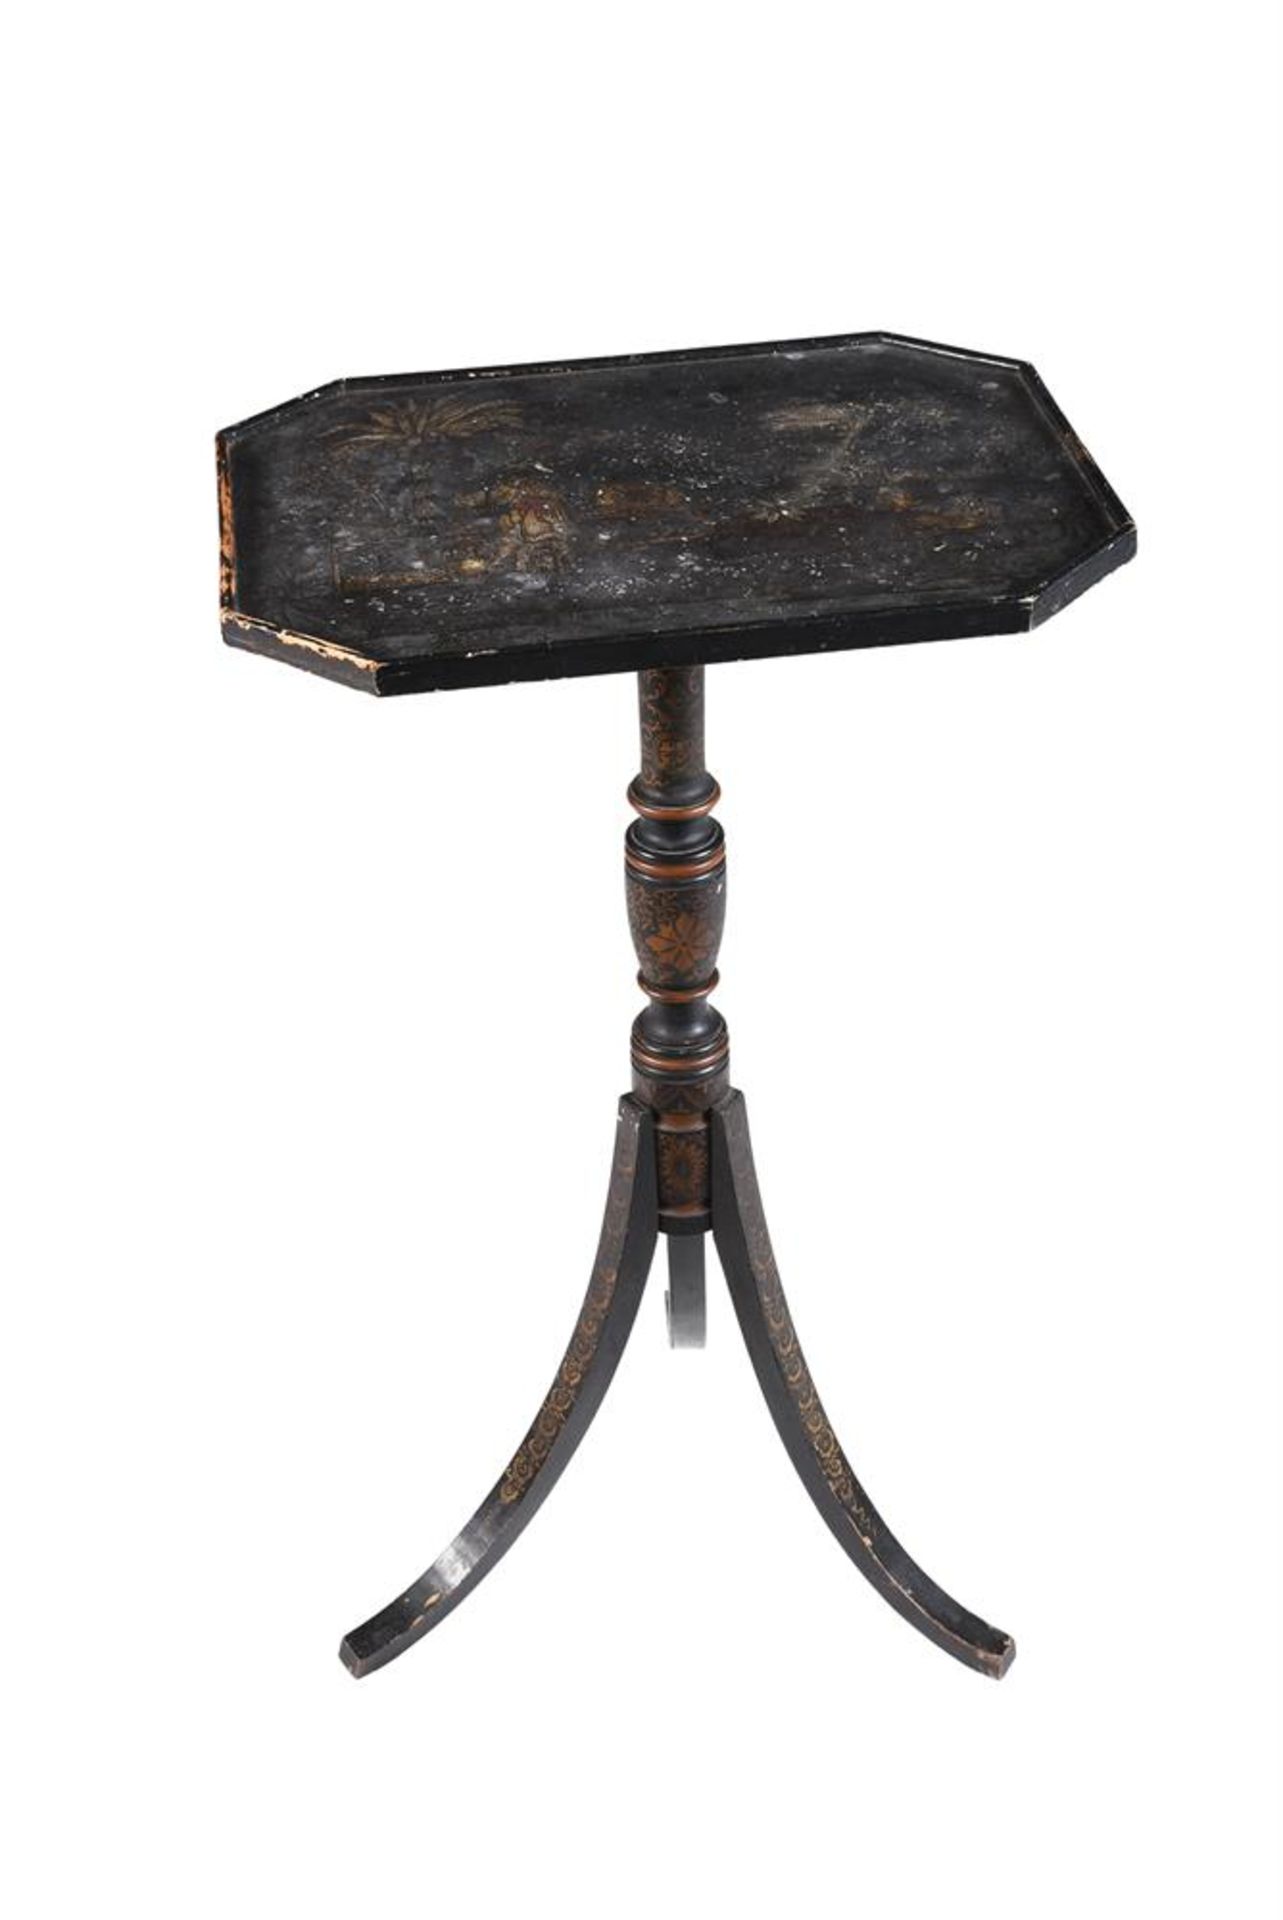 A REGENCY BLACK LACQUER AND PARCEL GILT CHINOISERIE DECORATED TRIPOD TABLE